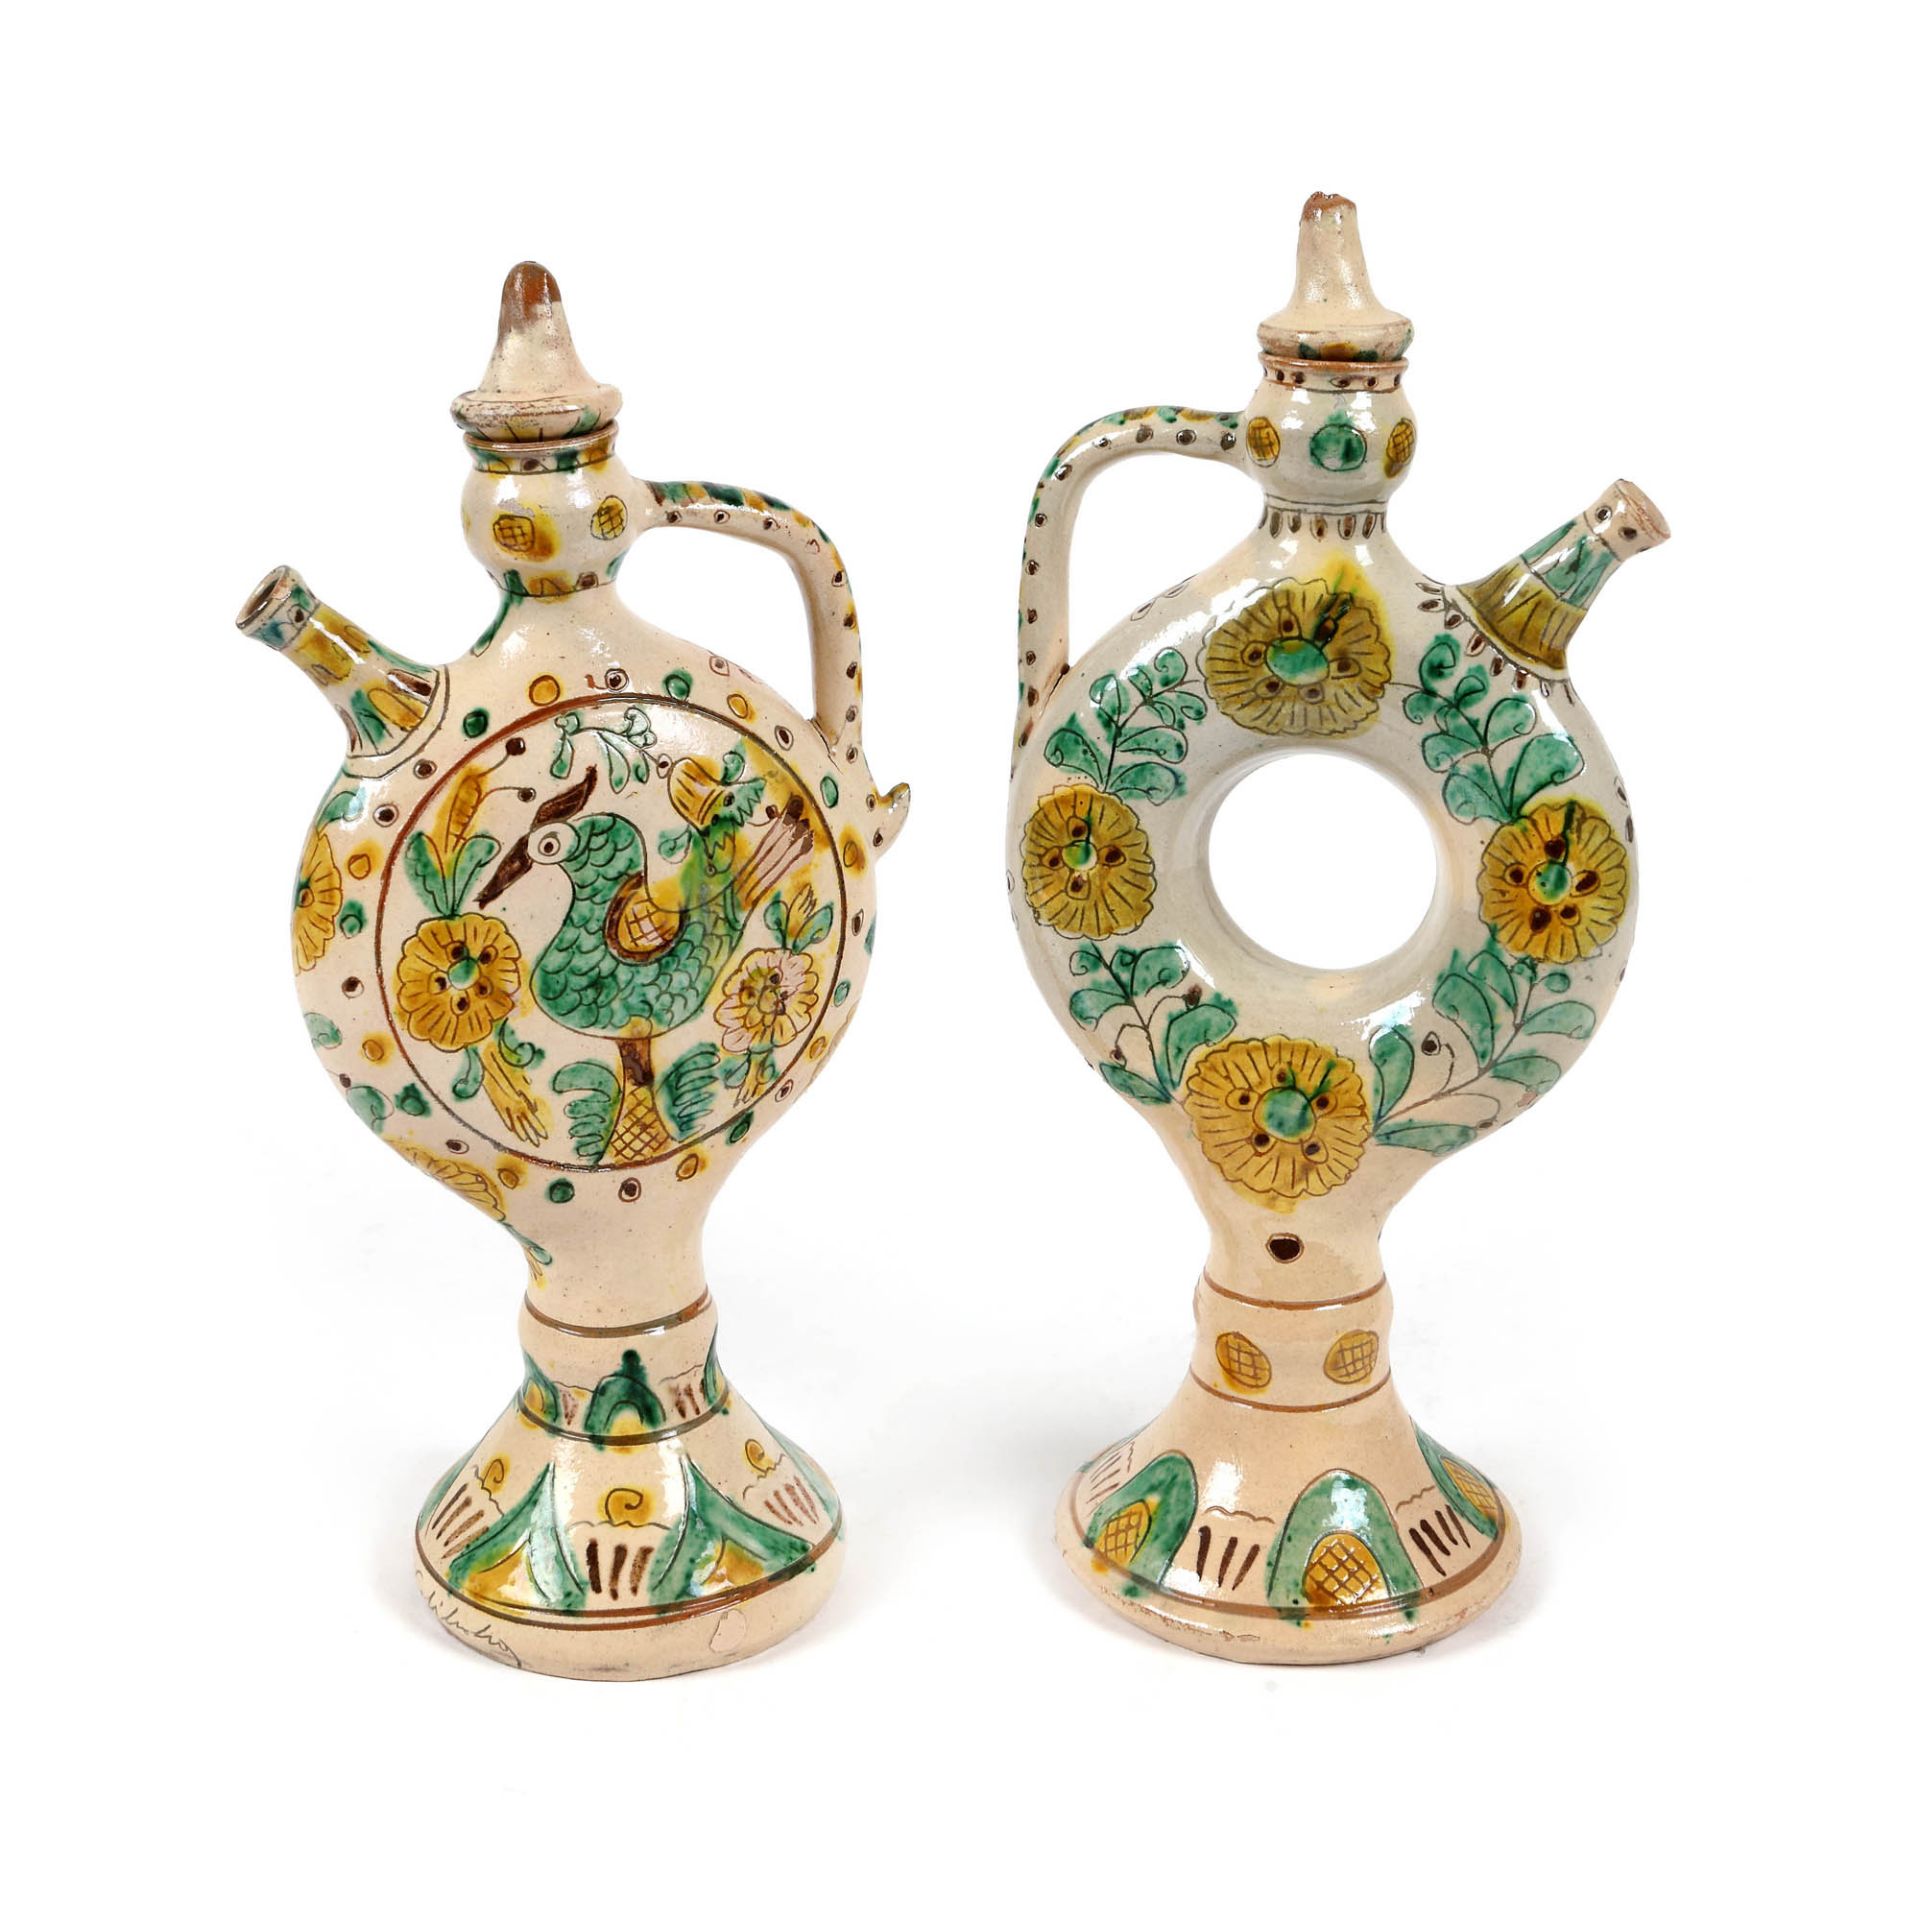 Pair of wedding jugs, decorated with bull and plant elements, signed Constantin Colibaba, interwar p - Image 2 of 3